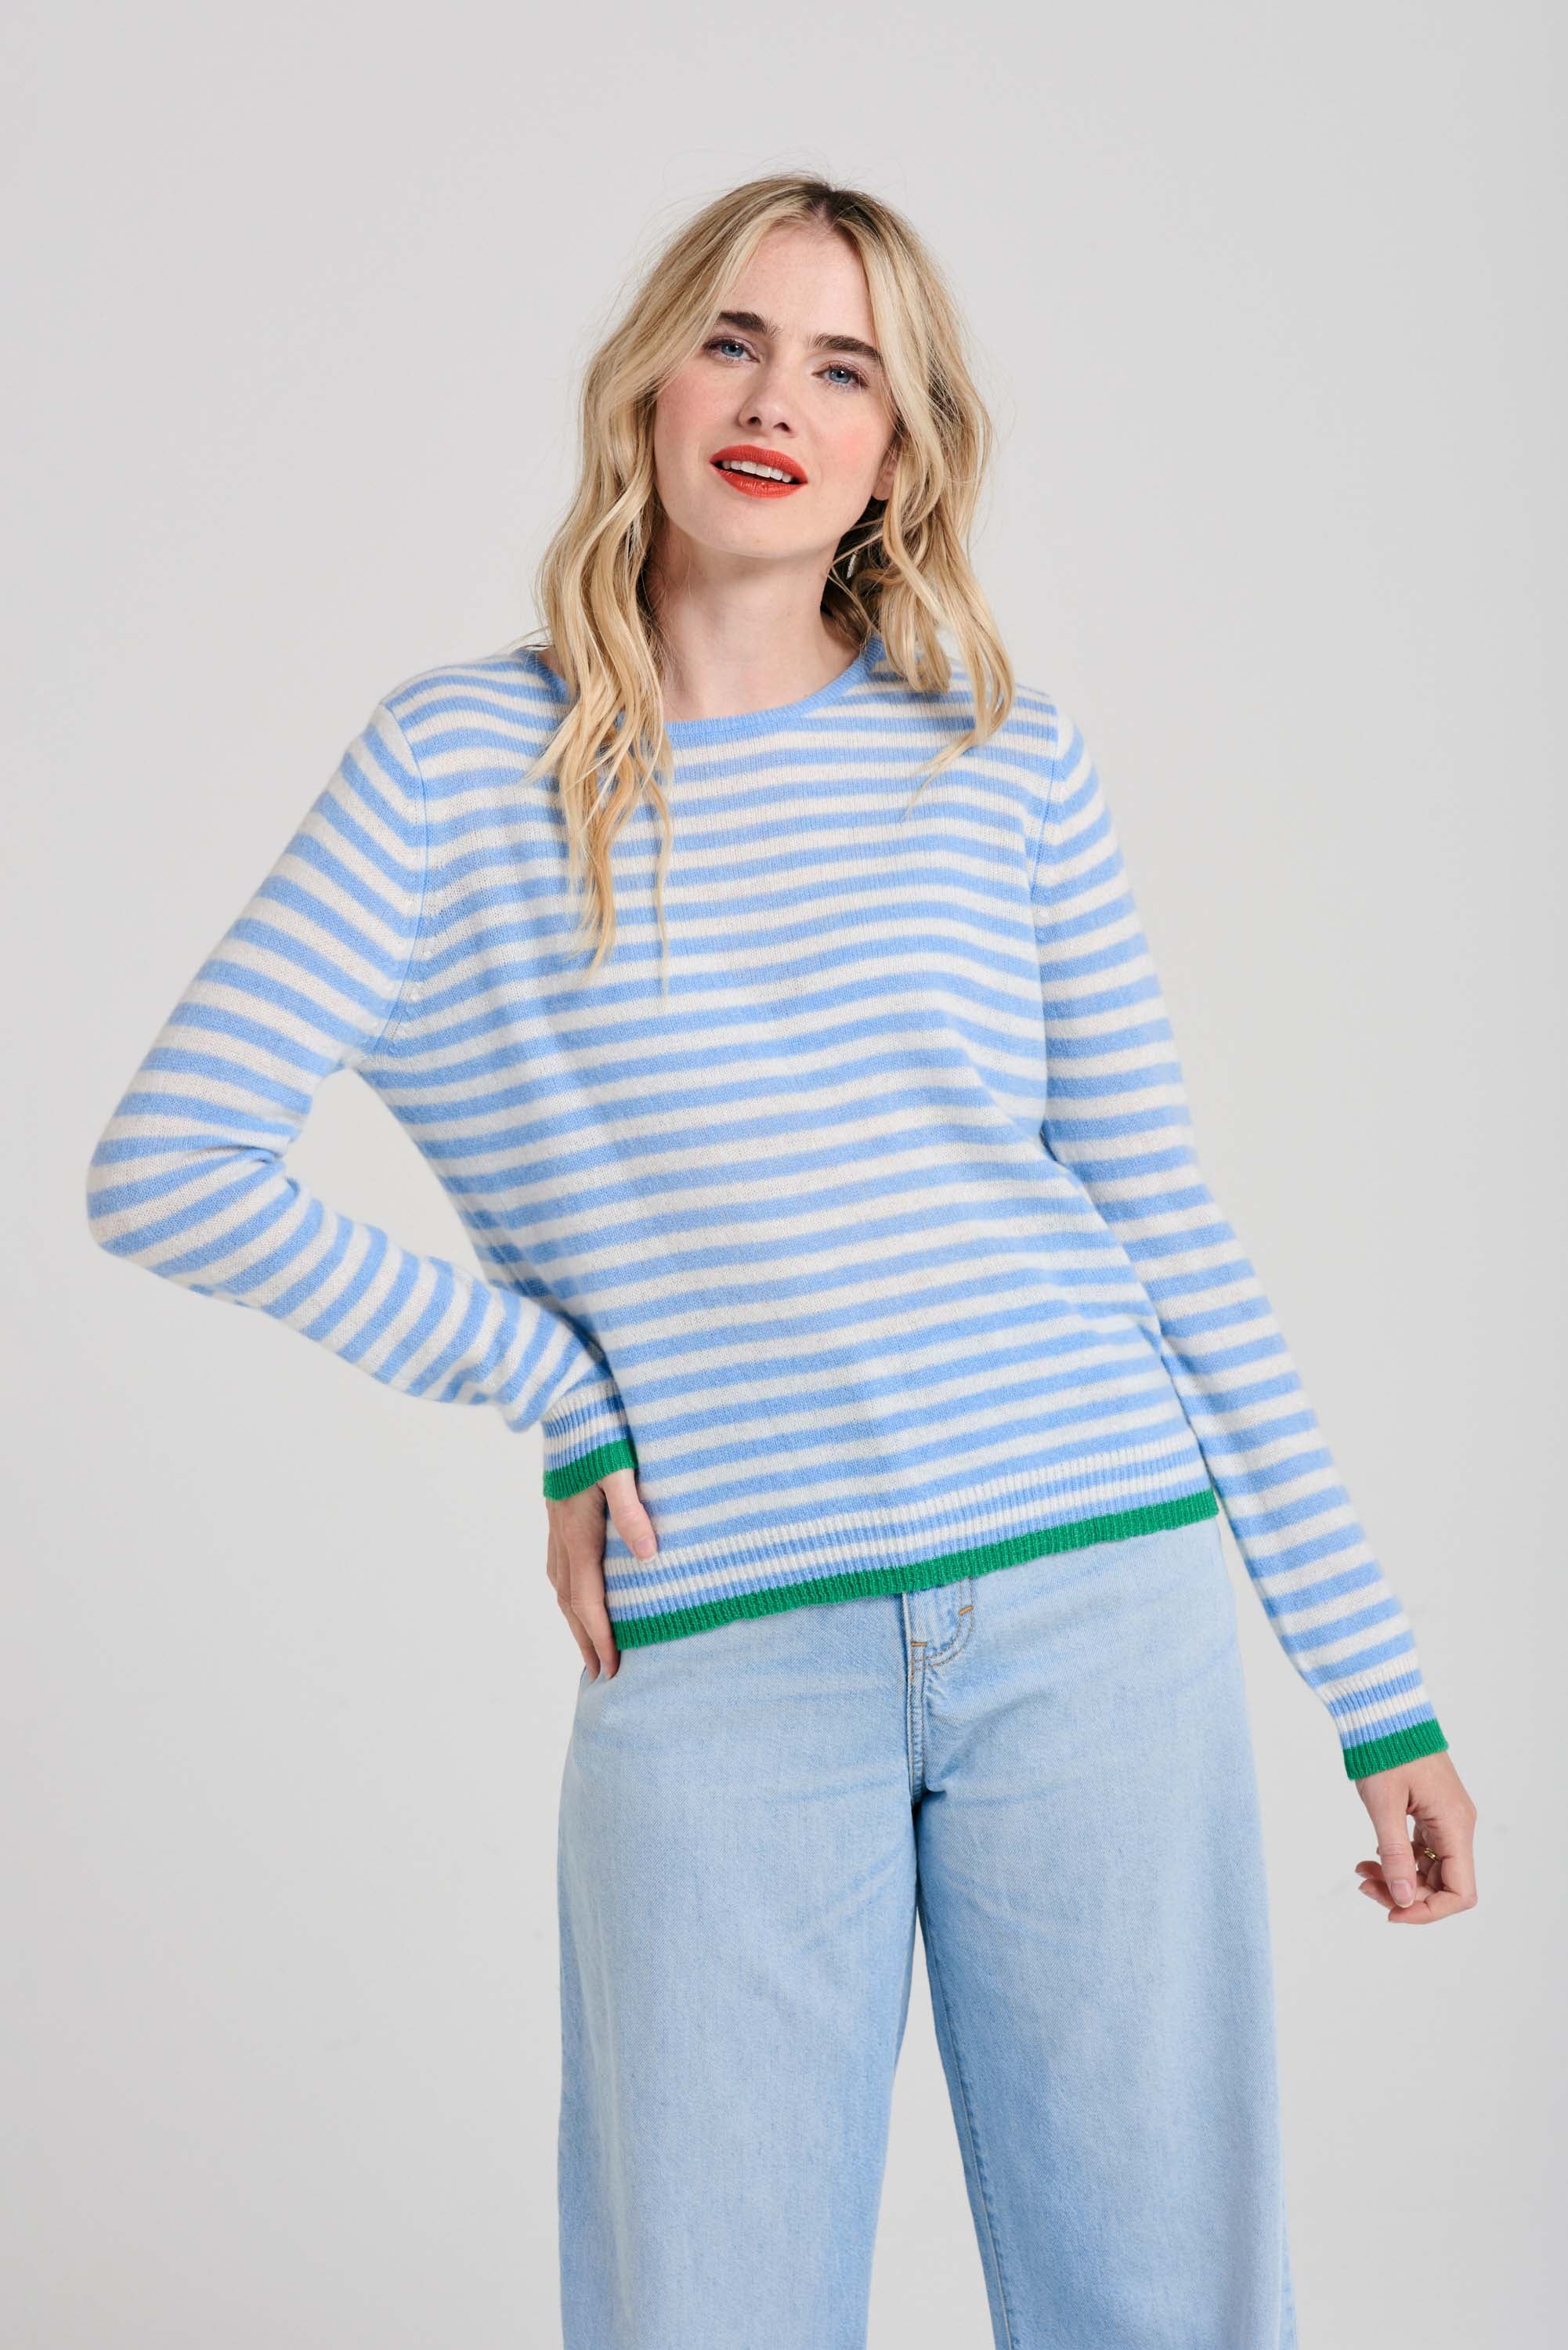 Blonde female model wearing Jumper1234 Little stripe cashmere crew neck jumper in wedgewood blue and cream, with bright green tipped ribs